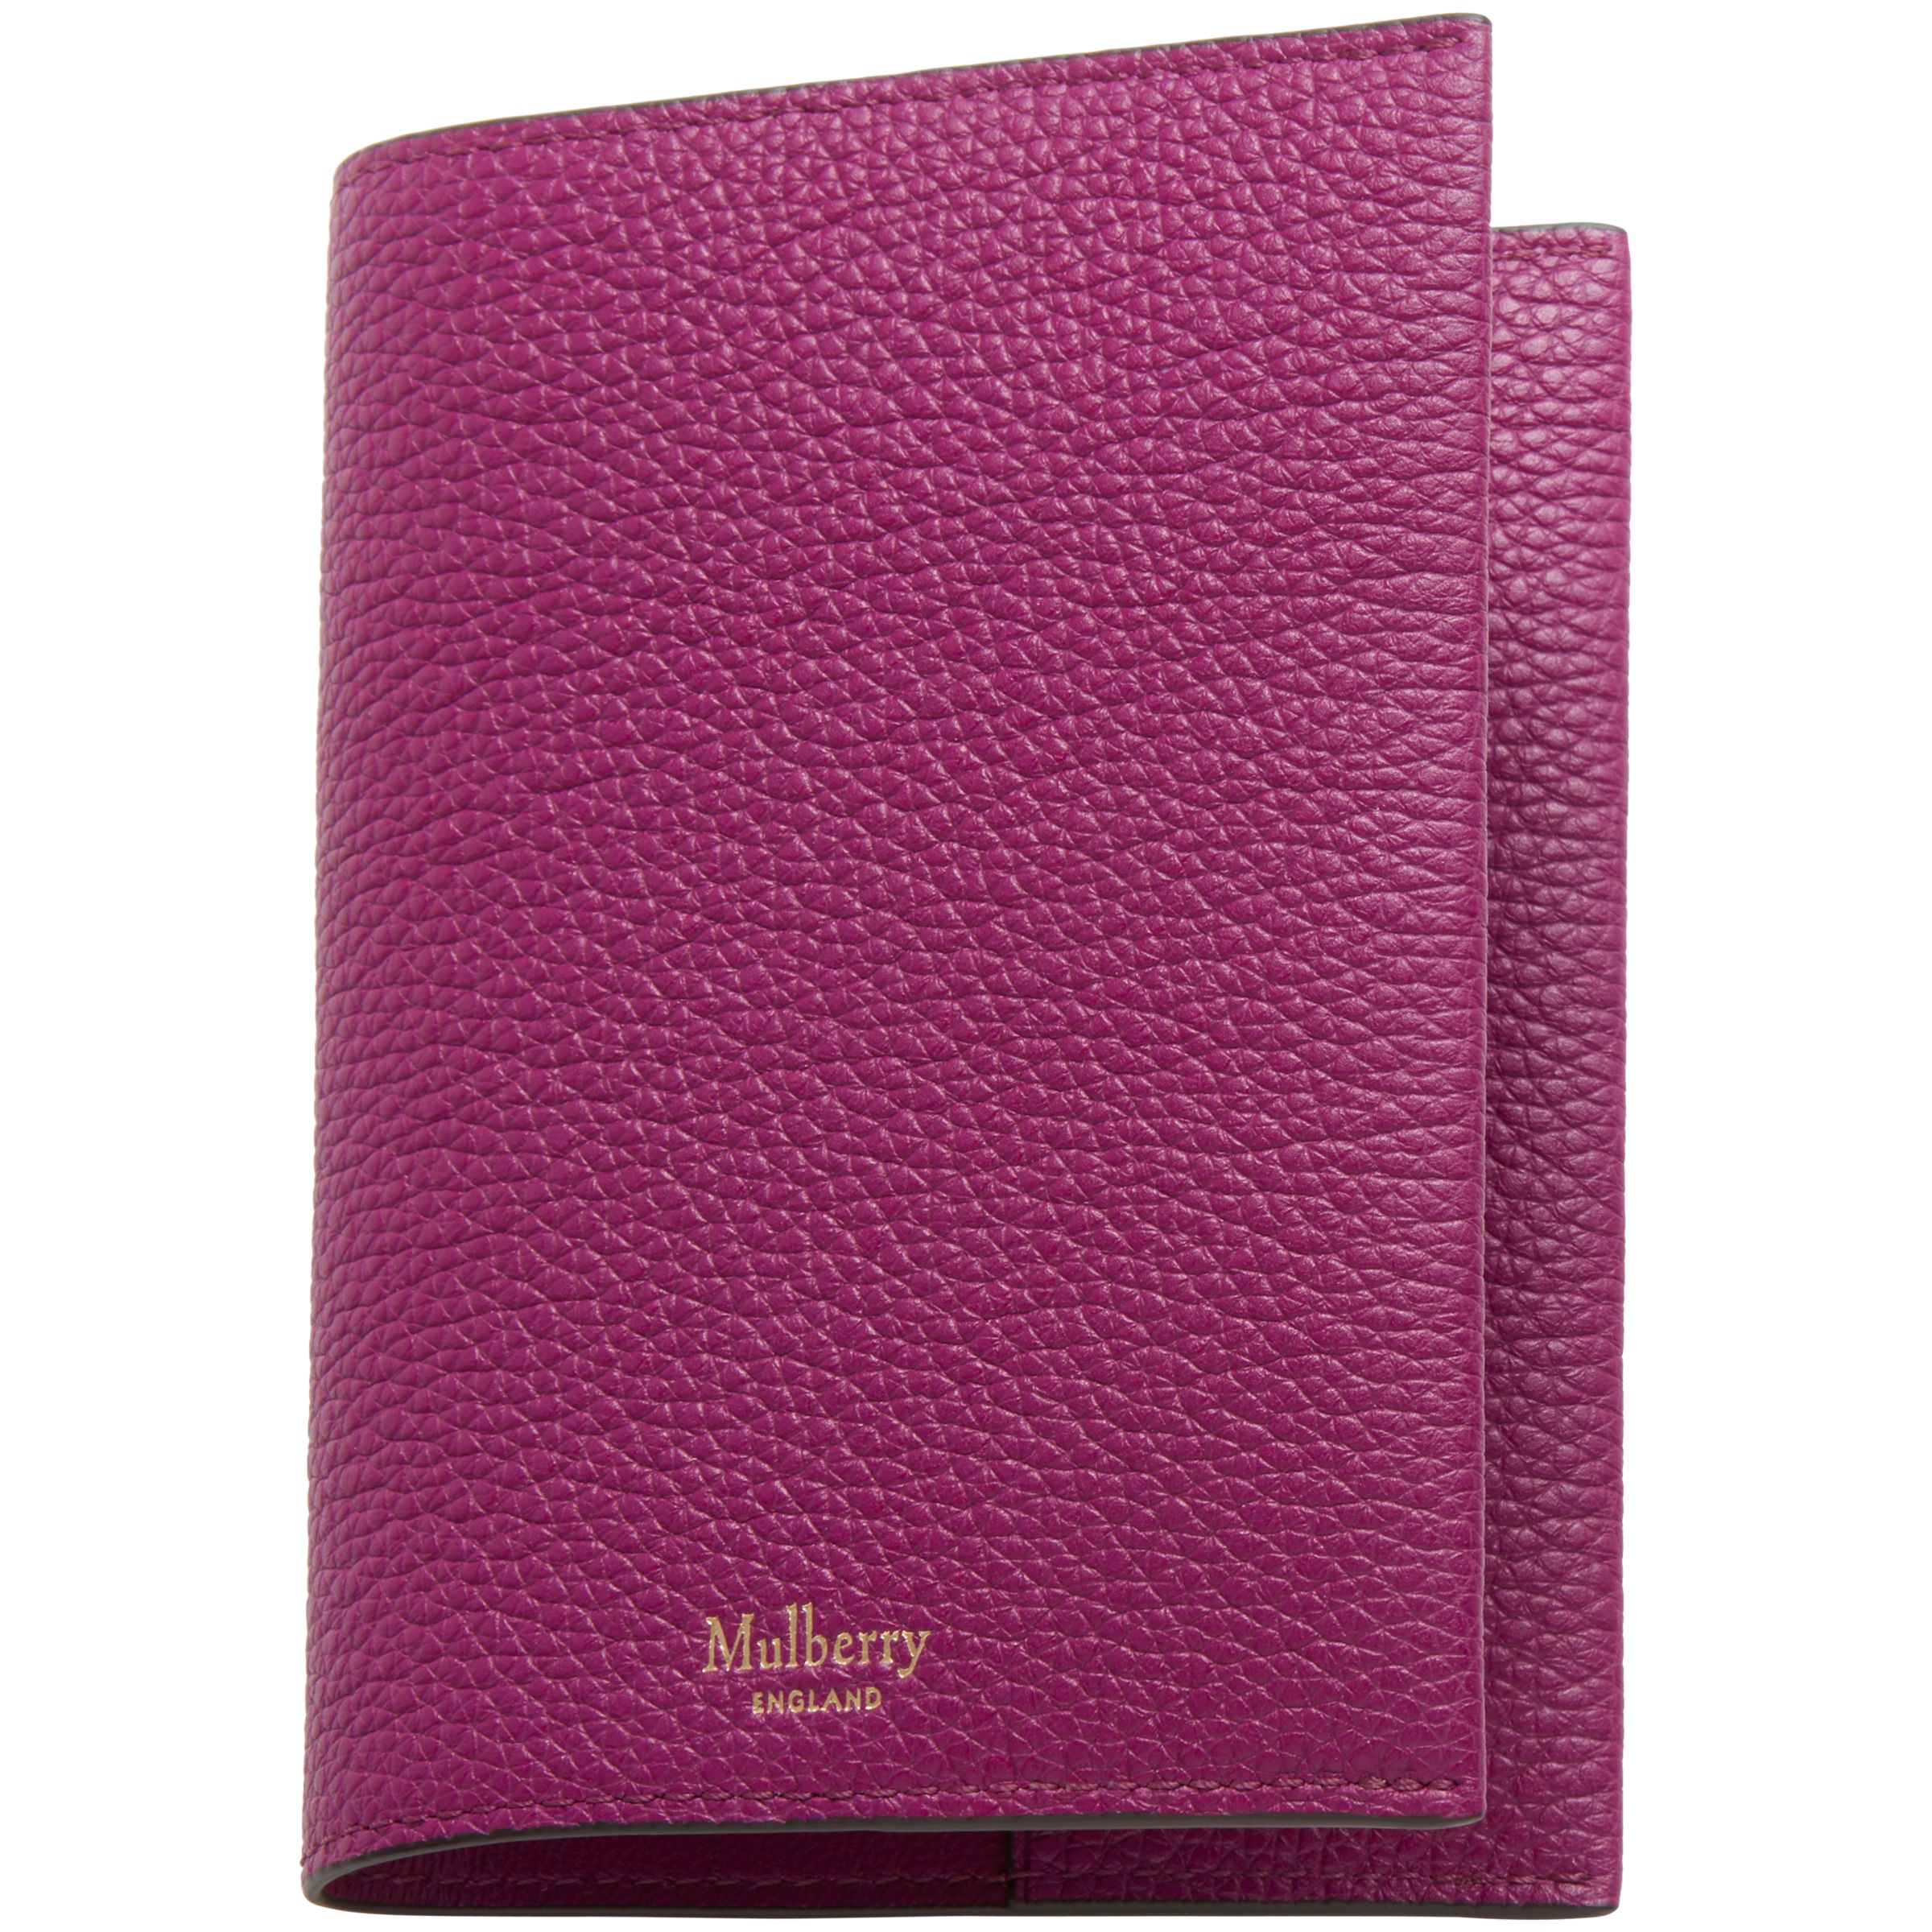 Mulberry Natural Grain Leather Passport Cover at John Lewis & Partners